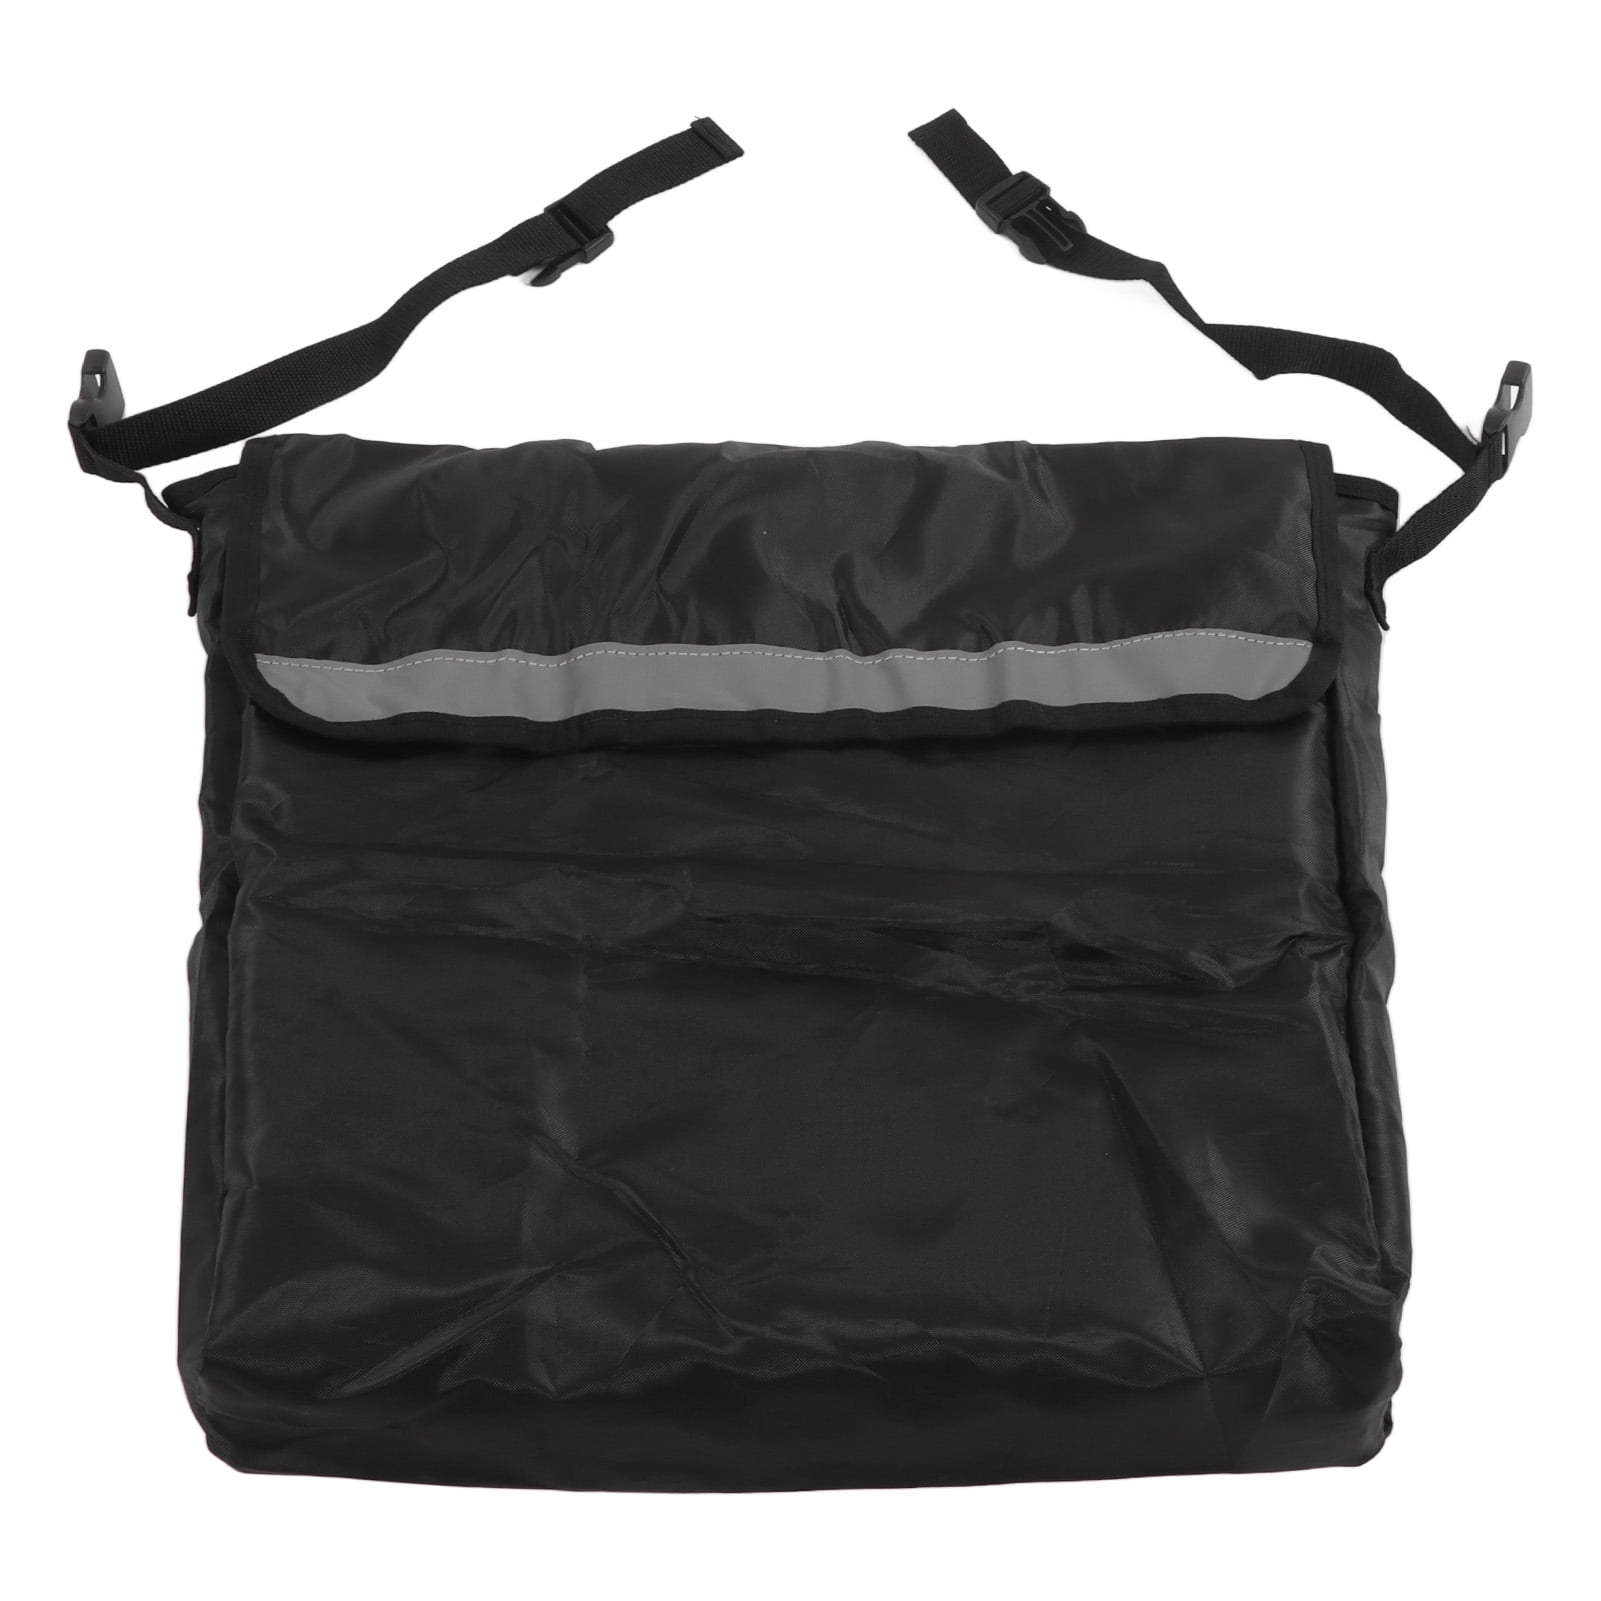 Wheelchair Bag Wheelchair Backpack Bag Wheelchair Bag For Back Of Chair ...